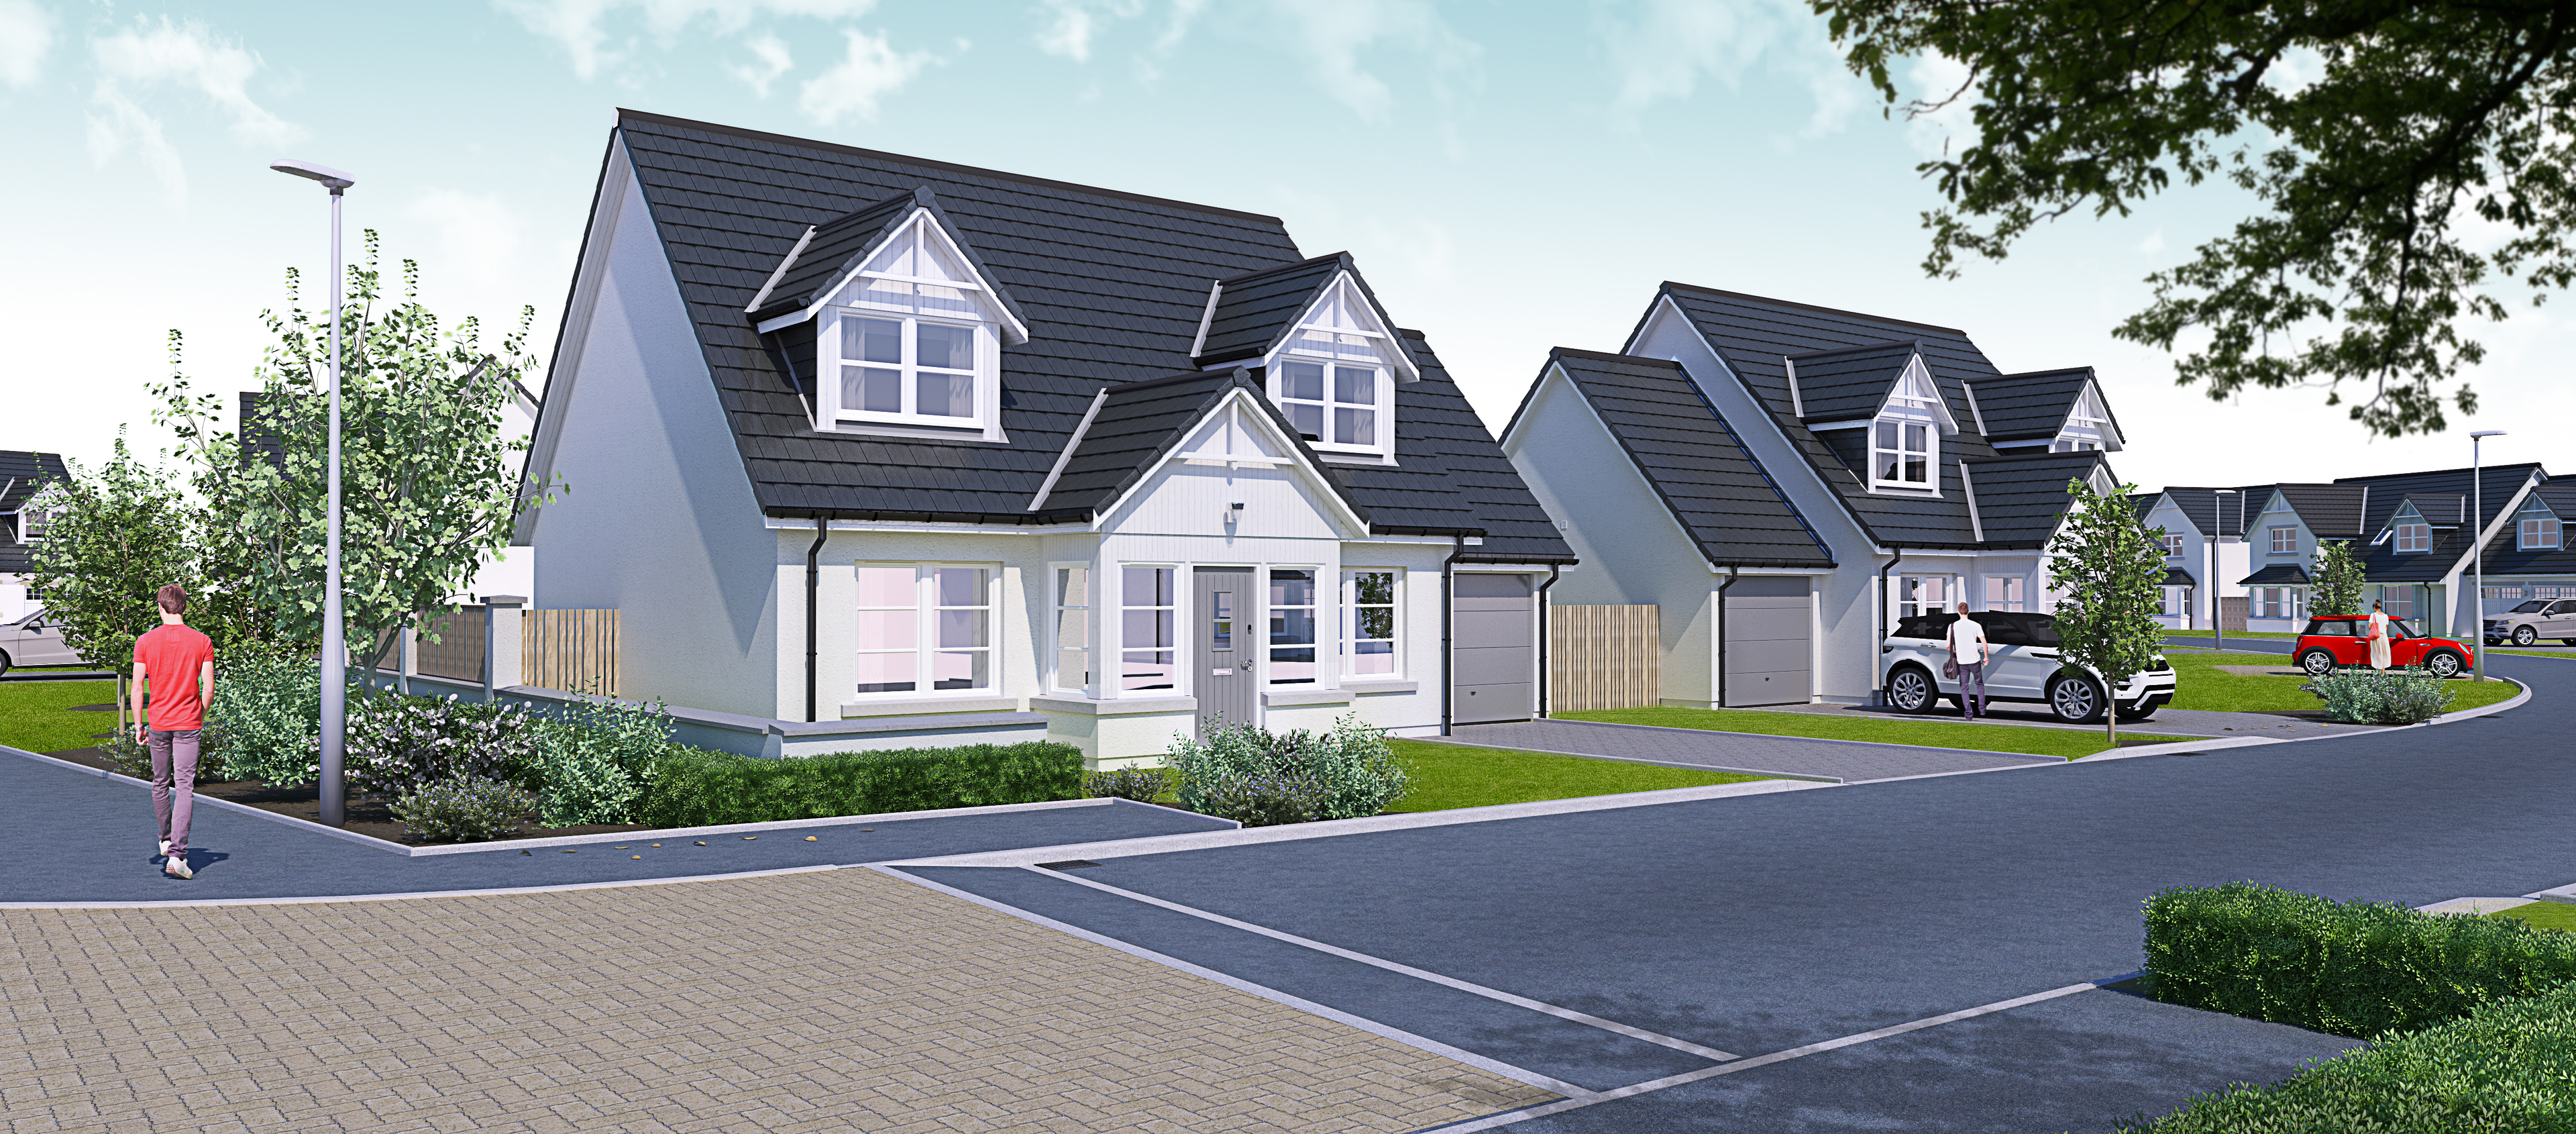 An artists impression of the proposed houses